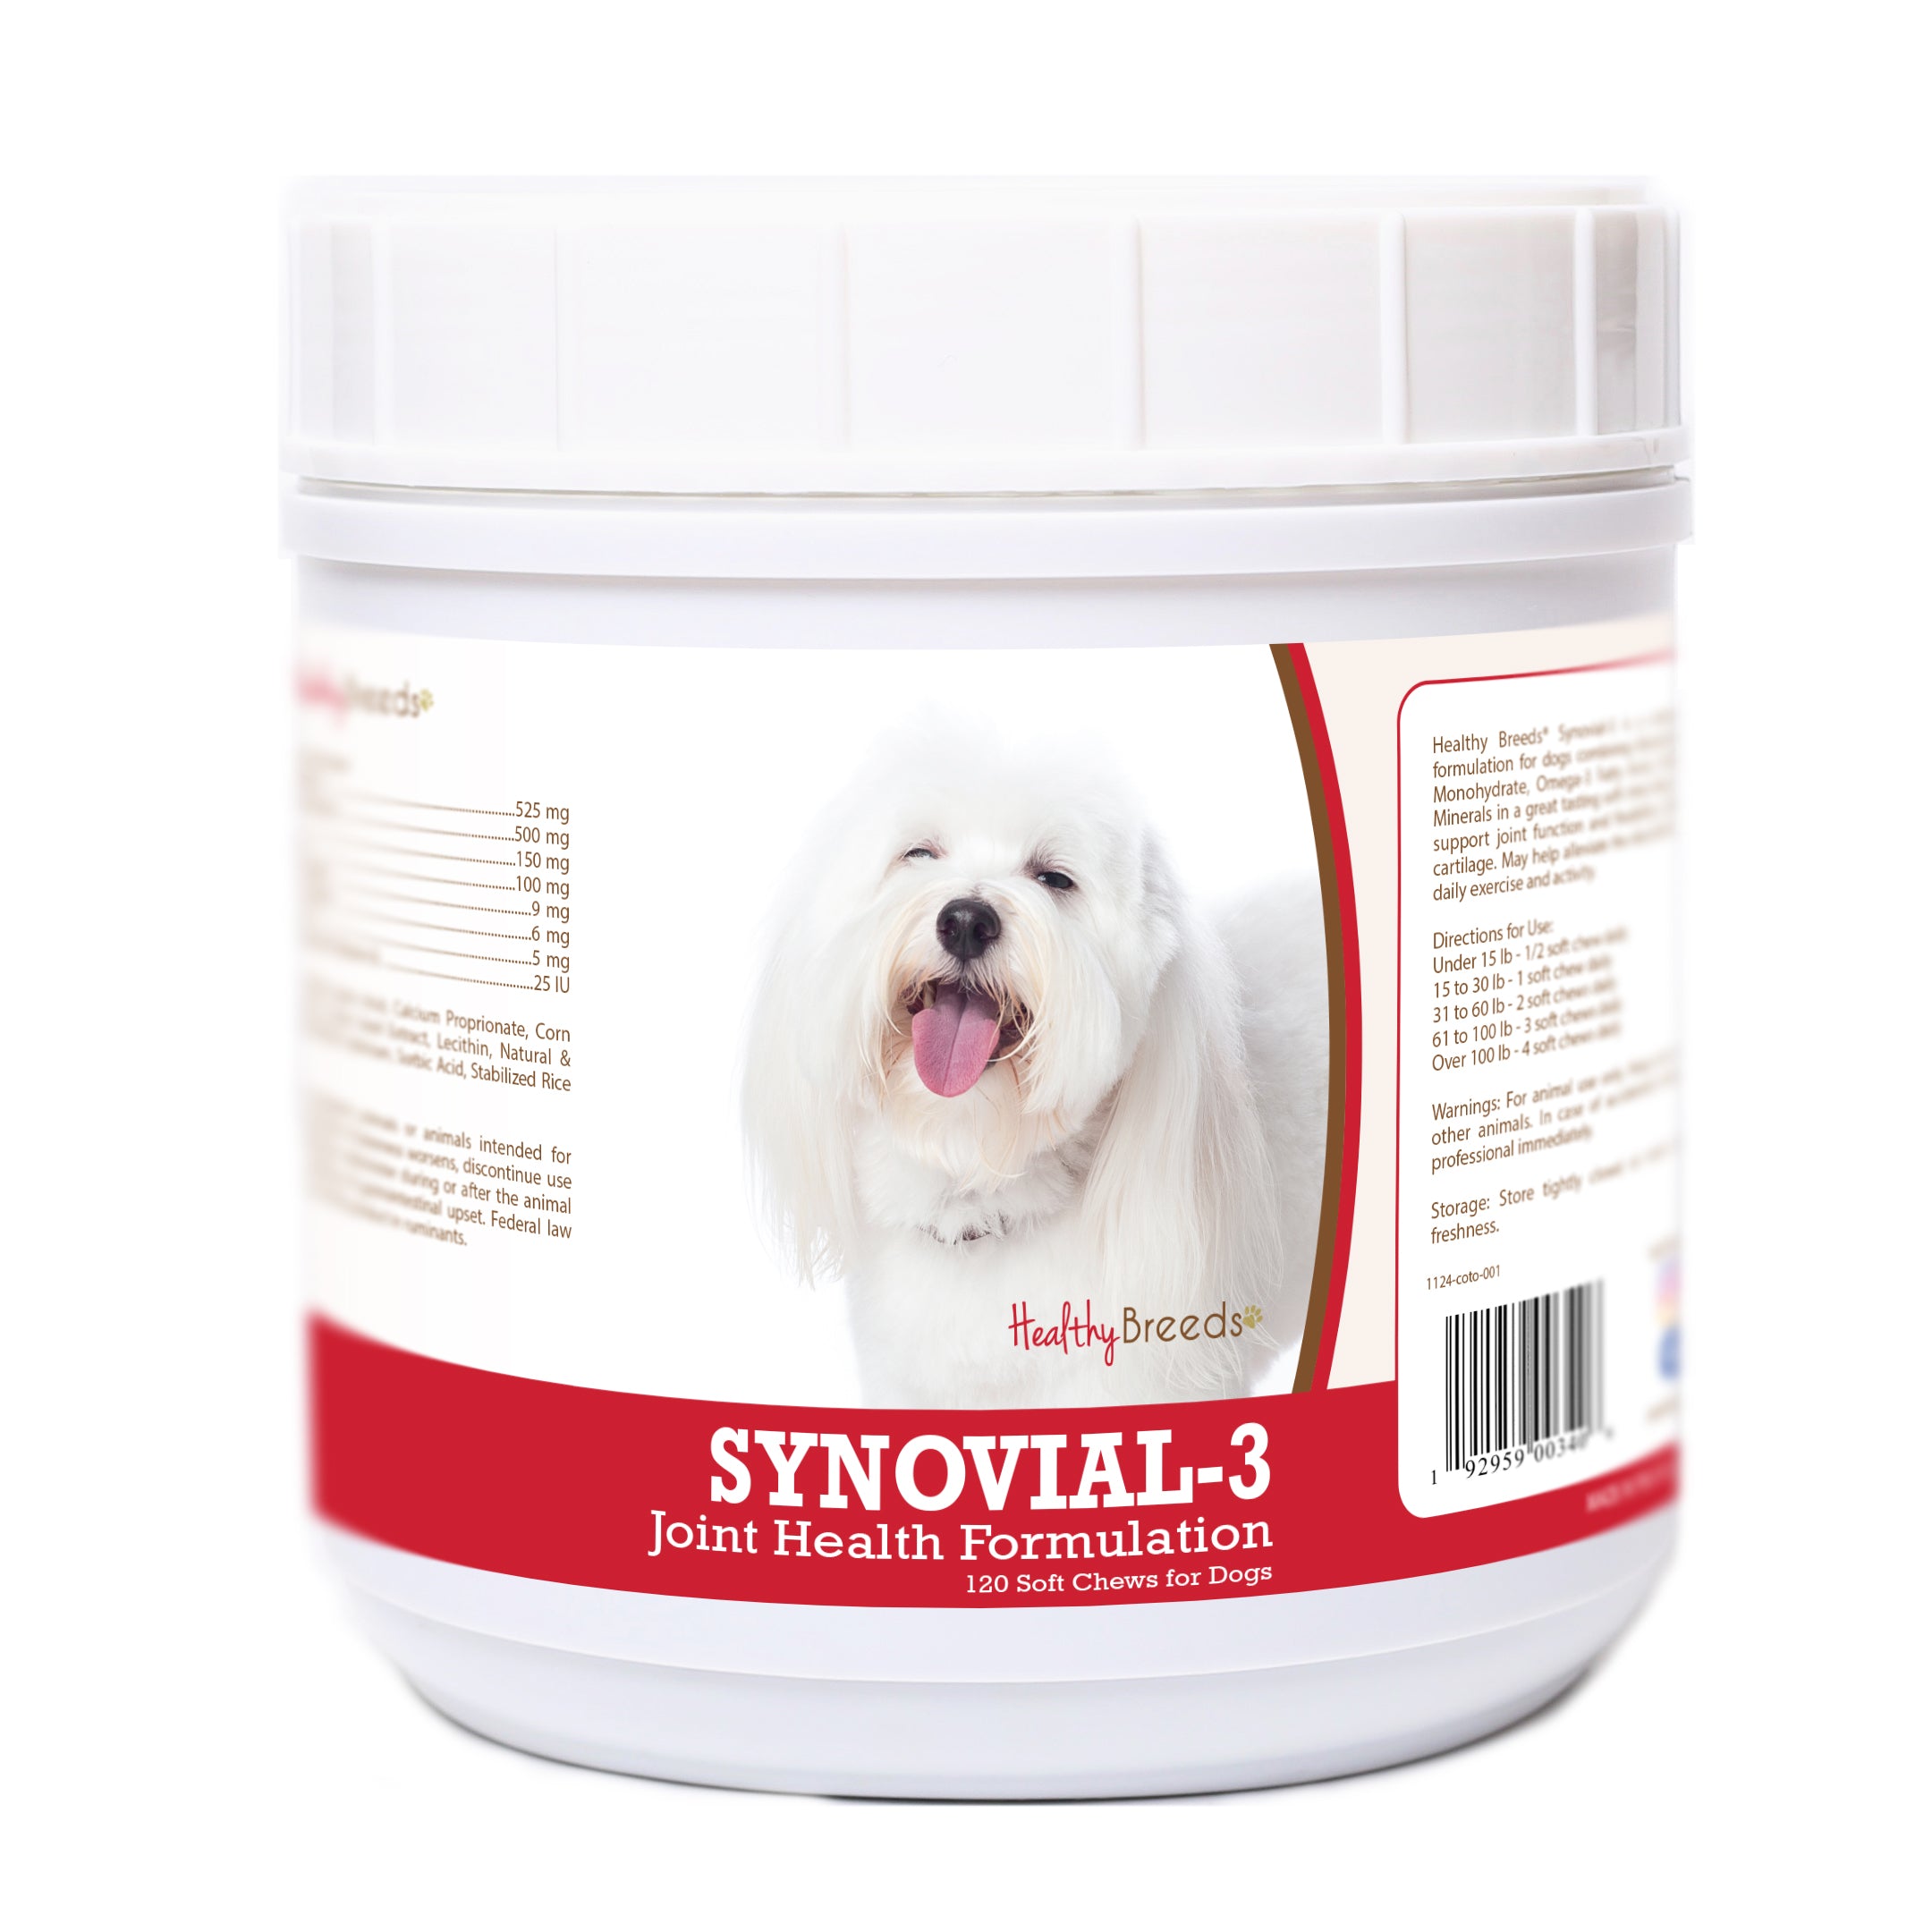 Coton de Tulear Synovial-3 Joint Health Formulation Soft Chews 120 Count